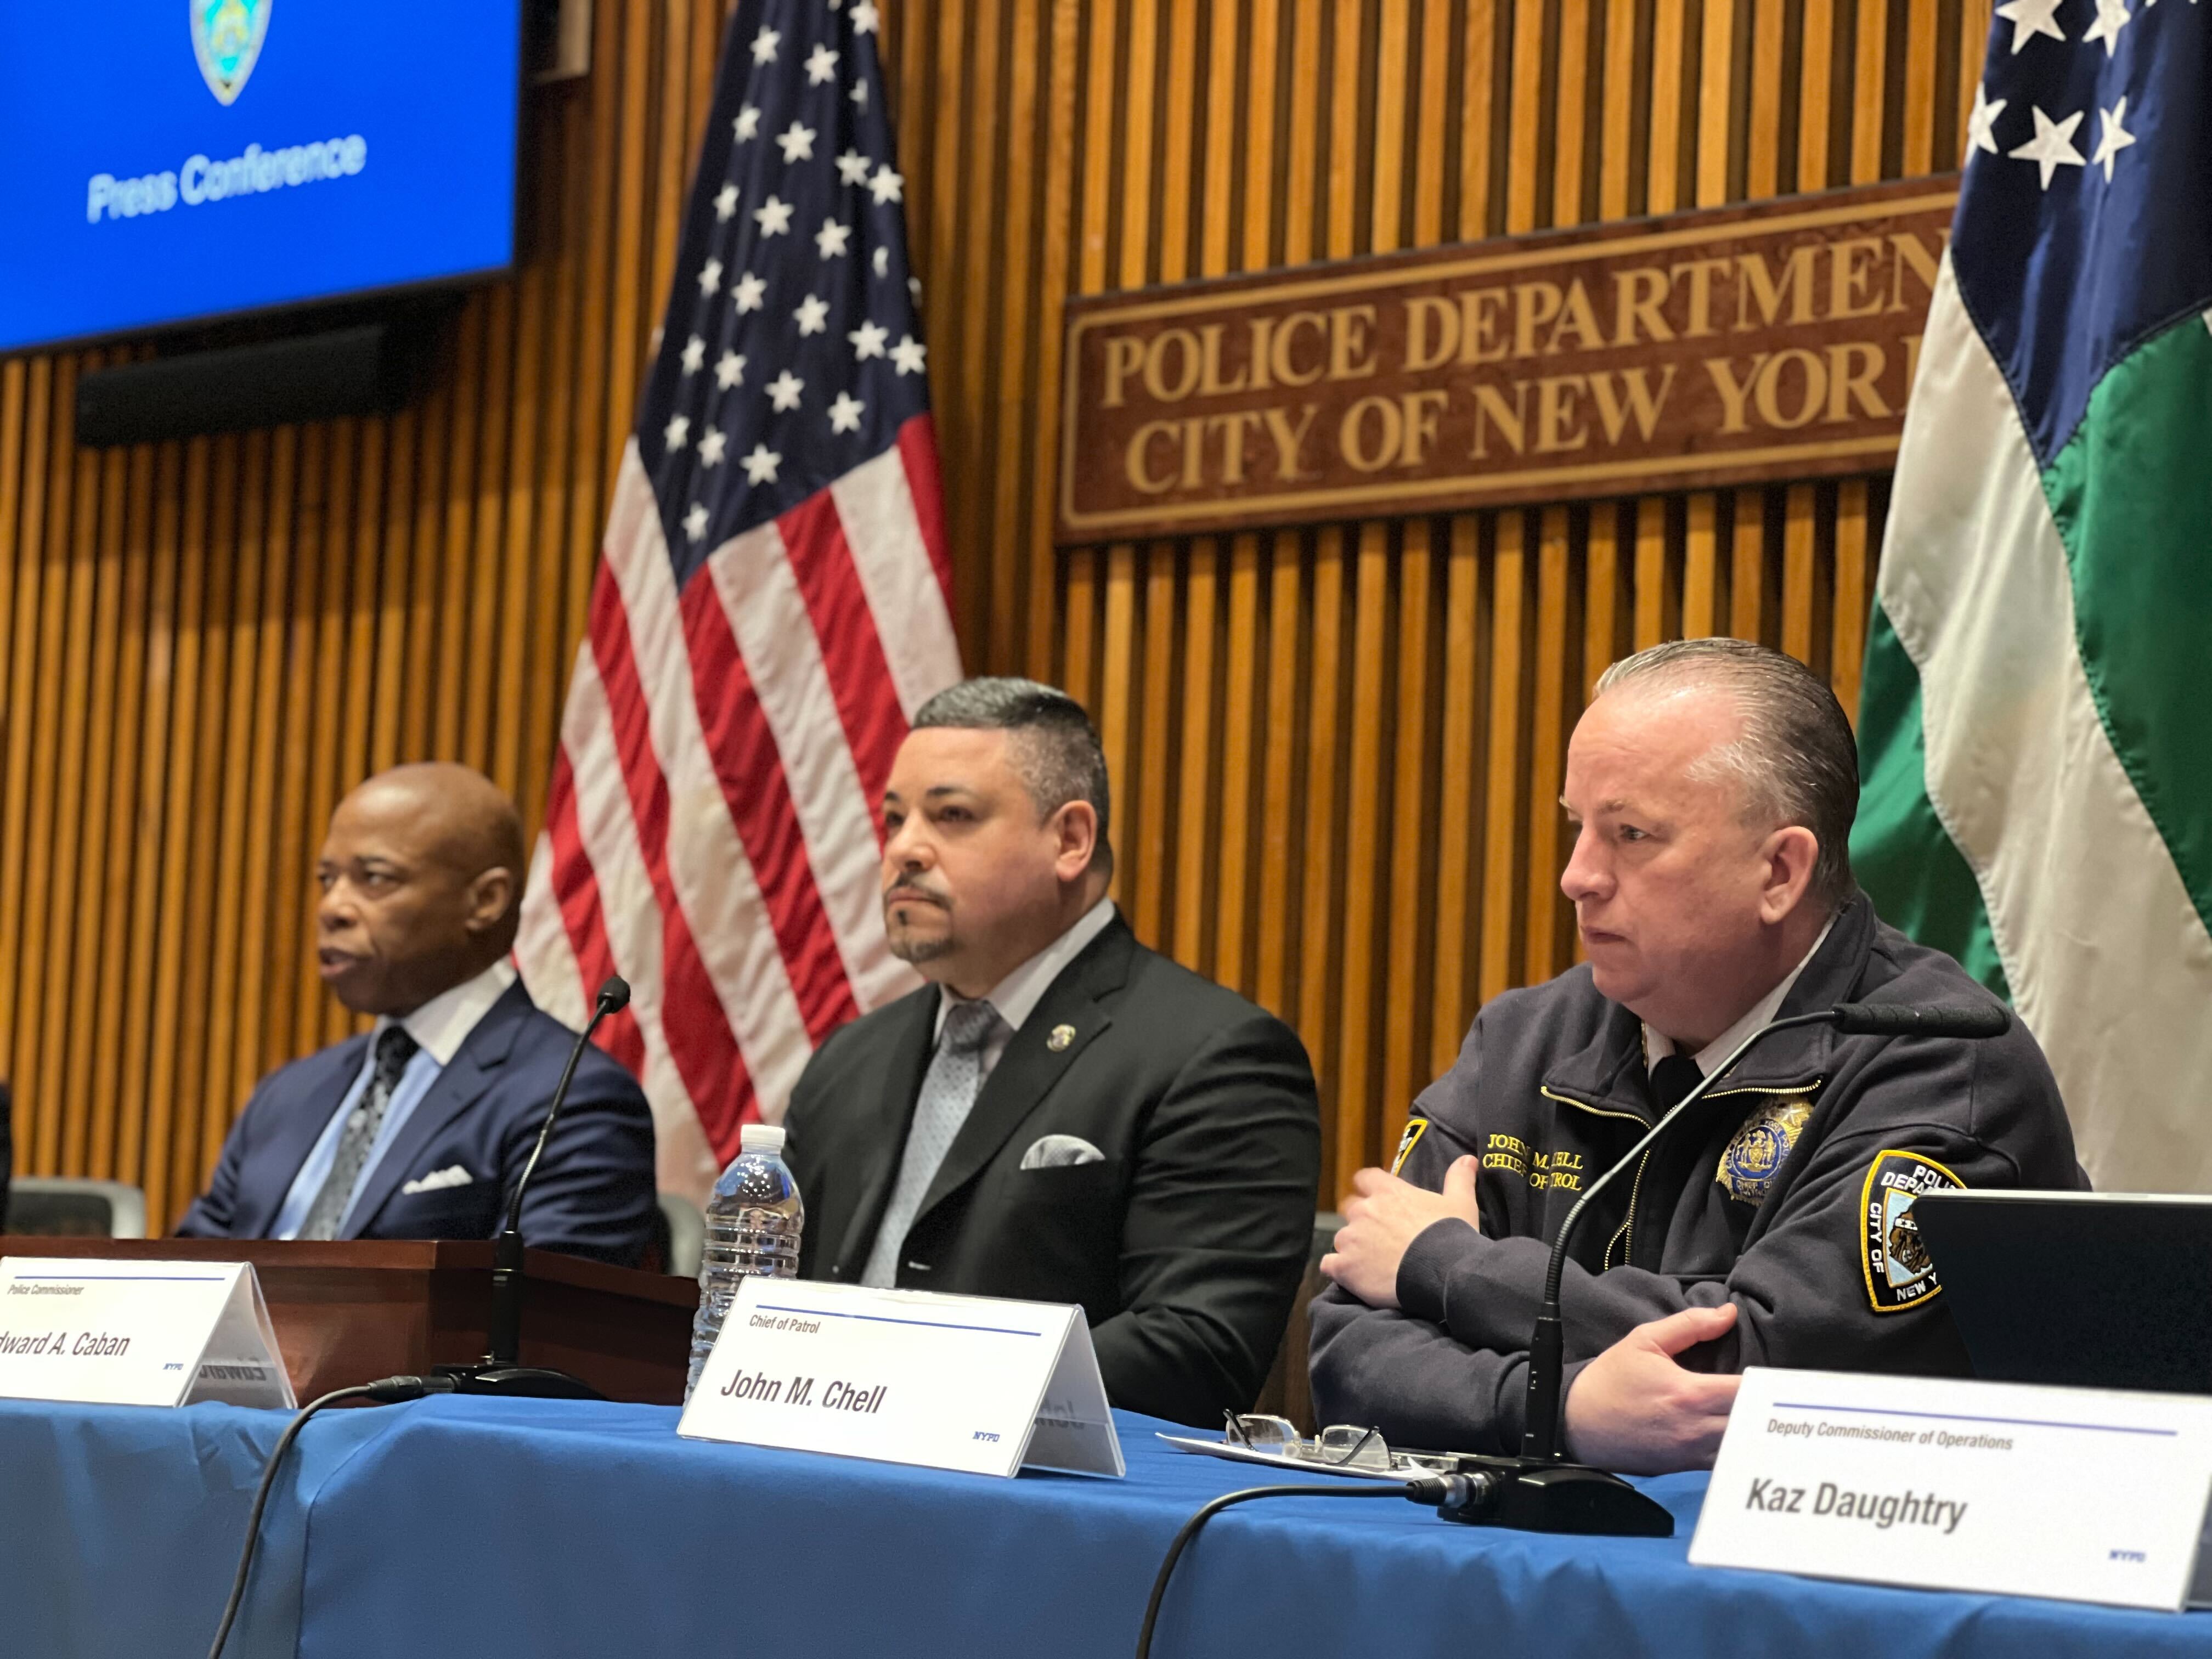 From left, Mayor Adams, NYPD Commissioner Edward Caban and NYPD Chief of Patrol John Chell at Wednesday's press conference.